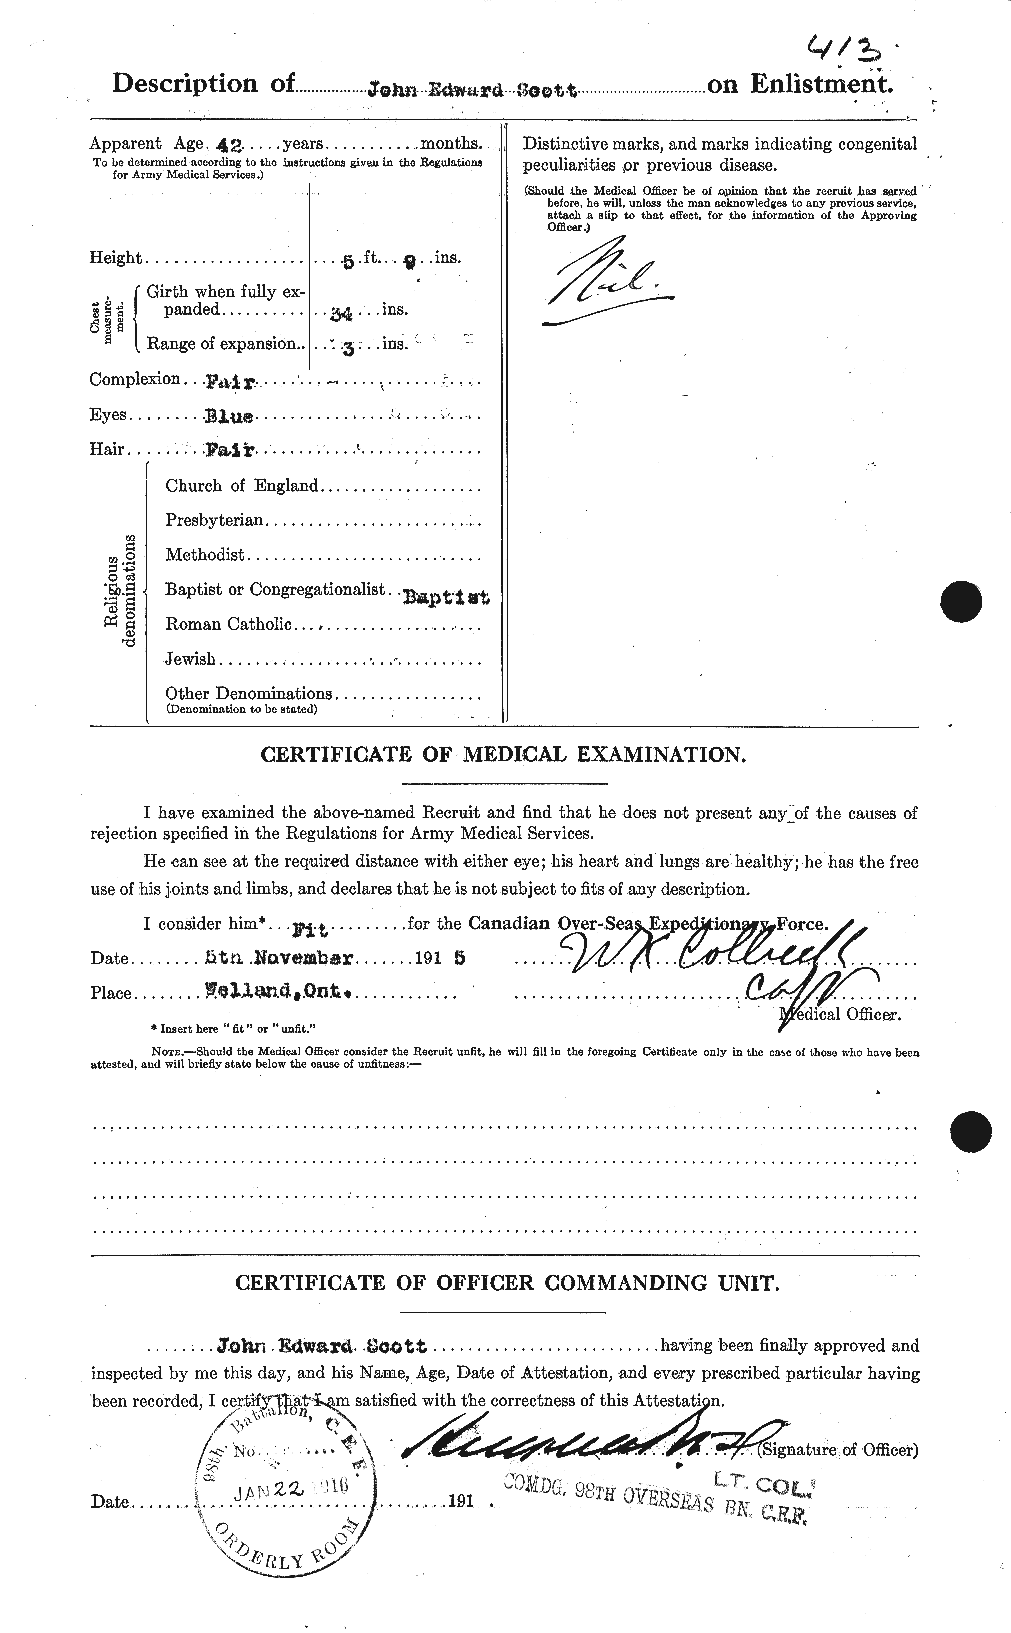 Personnel Records of the First World War - CEF 084635b